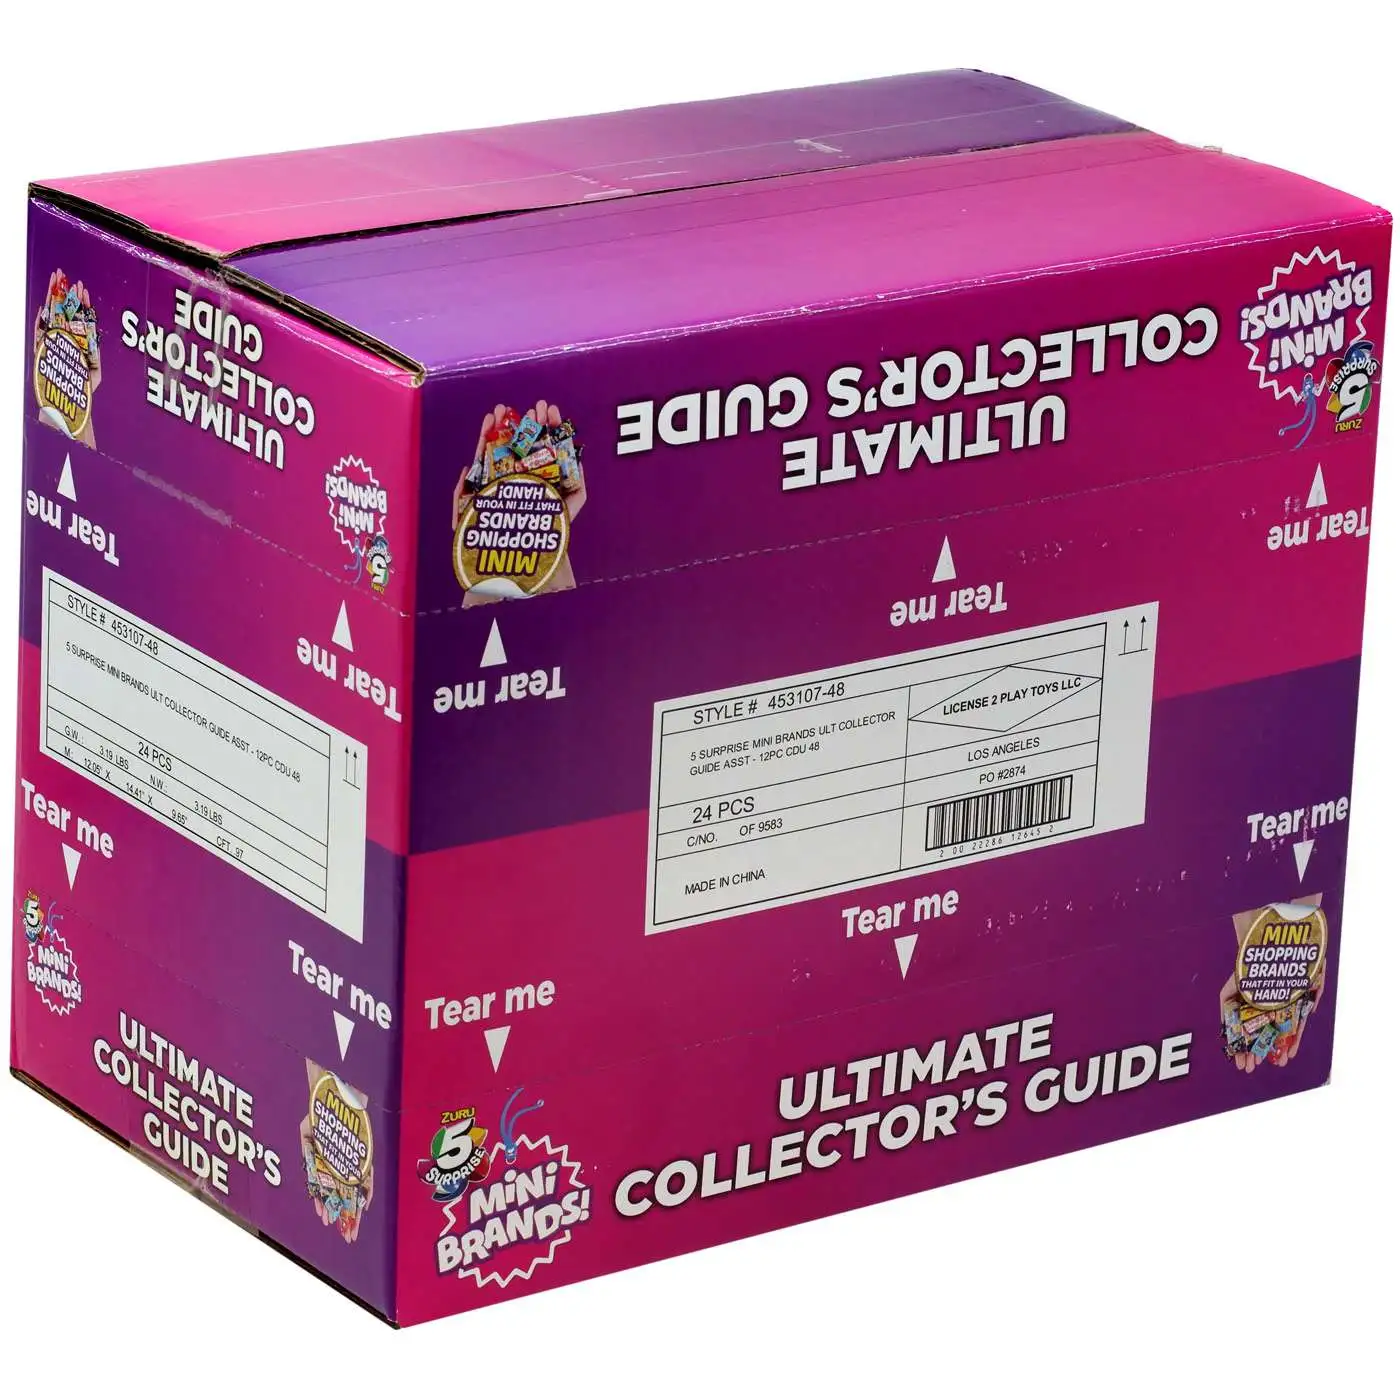 5 Surprise Mini Brands! Ultimate Collector's Guide Mystery Box [24 Packs]